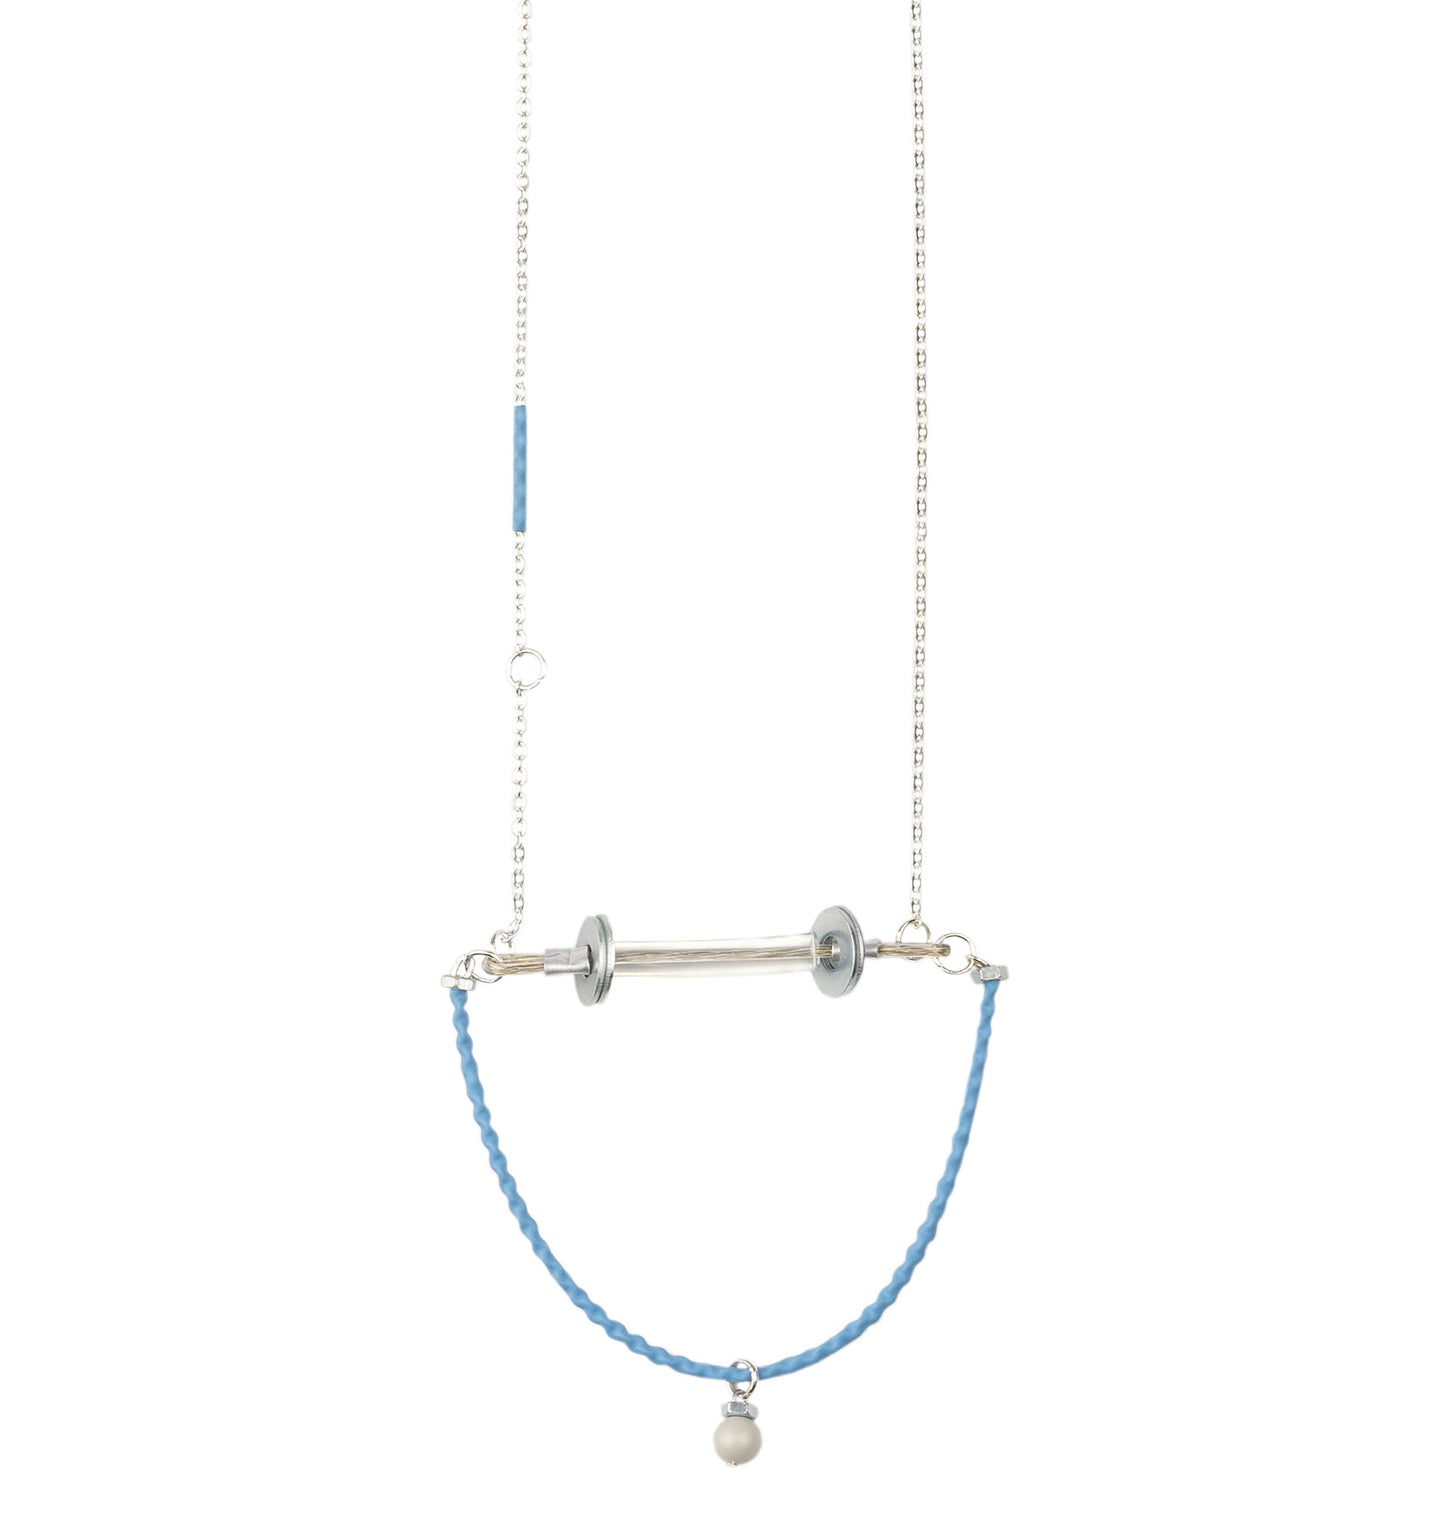 We craft the strongest base for all your experiences and keep them safely. These unique industrial design subversive jewellery piece consists of building materials such as screws, cable covered by blue plastic. The length of chain is about 70 cm. Decorated with light grey Swarovski pearl. Every Mellow by Melita Rus pendant has it's own life code, so do this one - P6/019.  jewelry Collection 'She's'18'